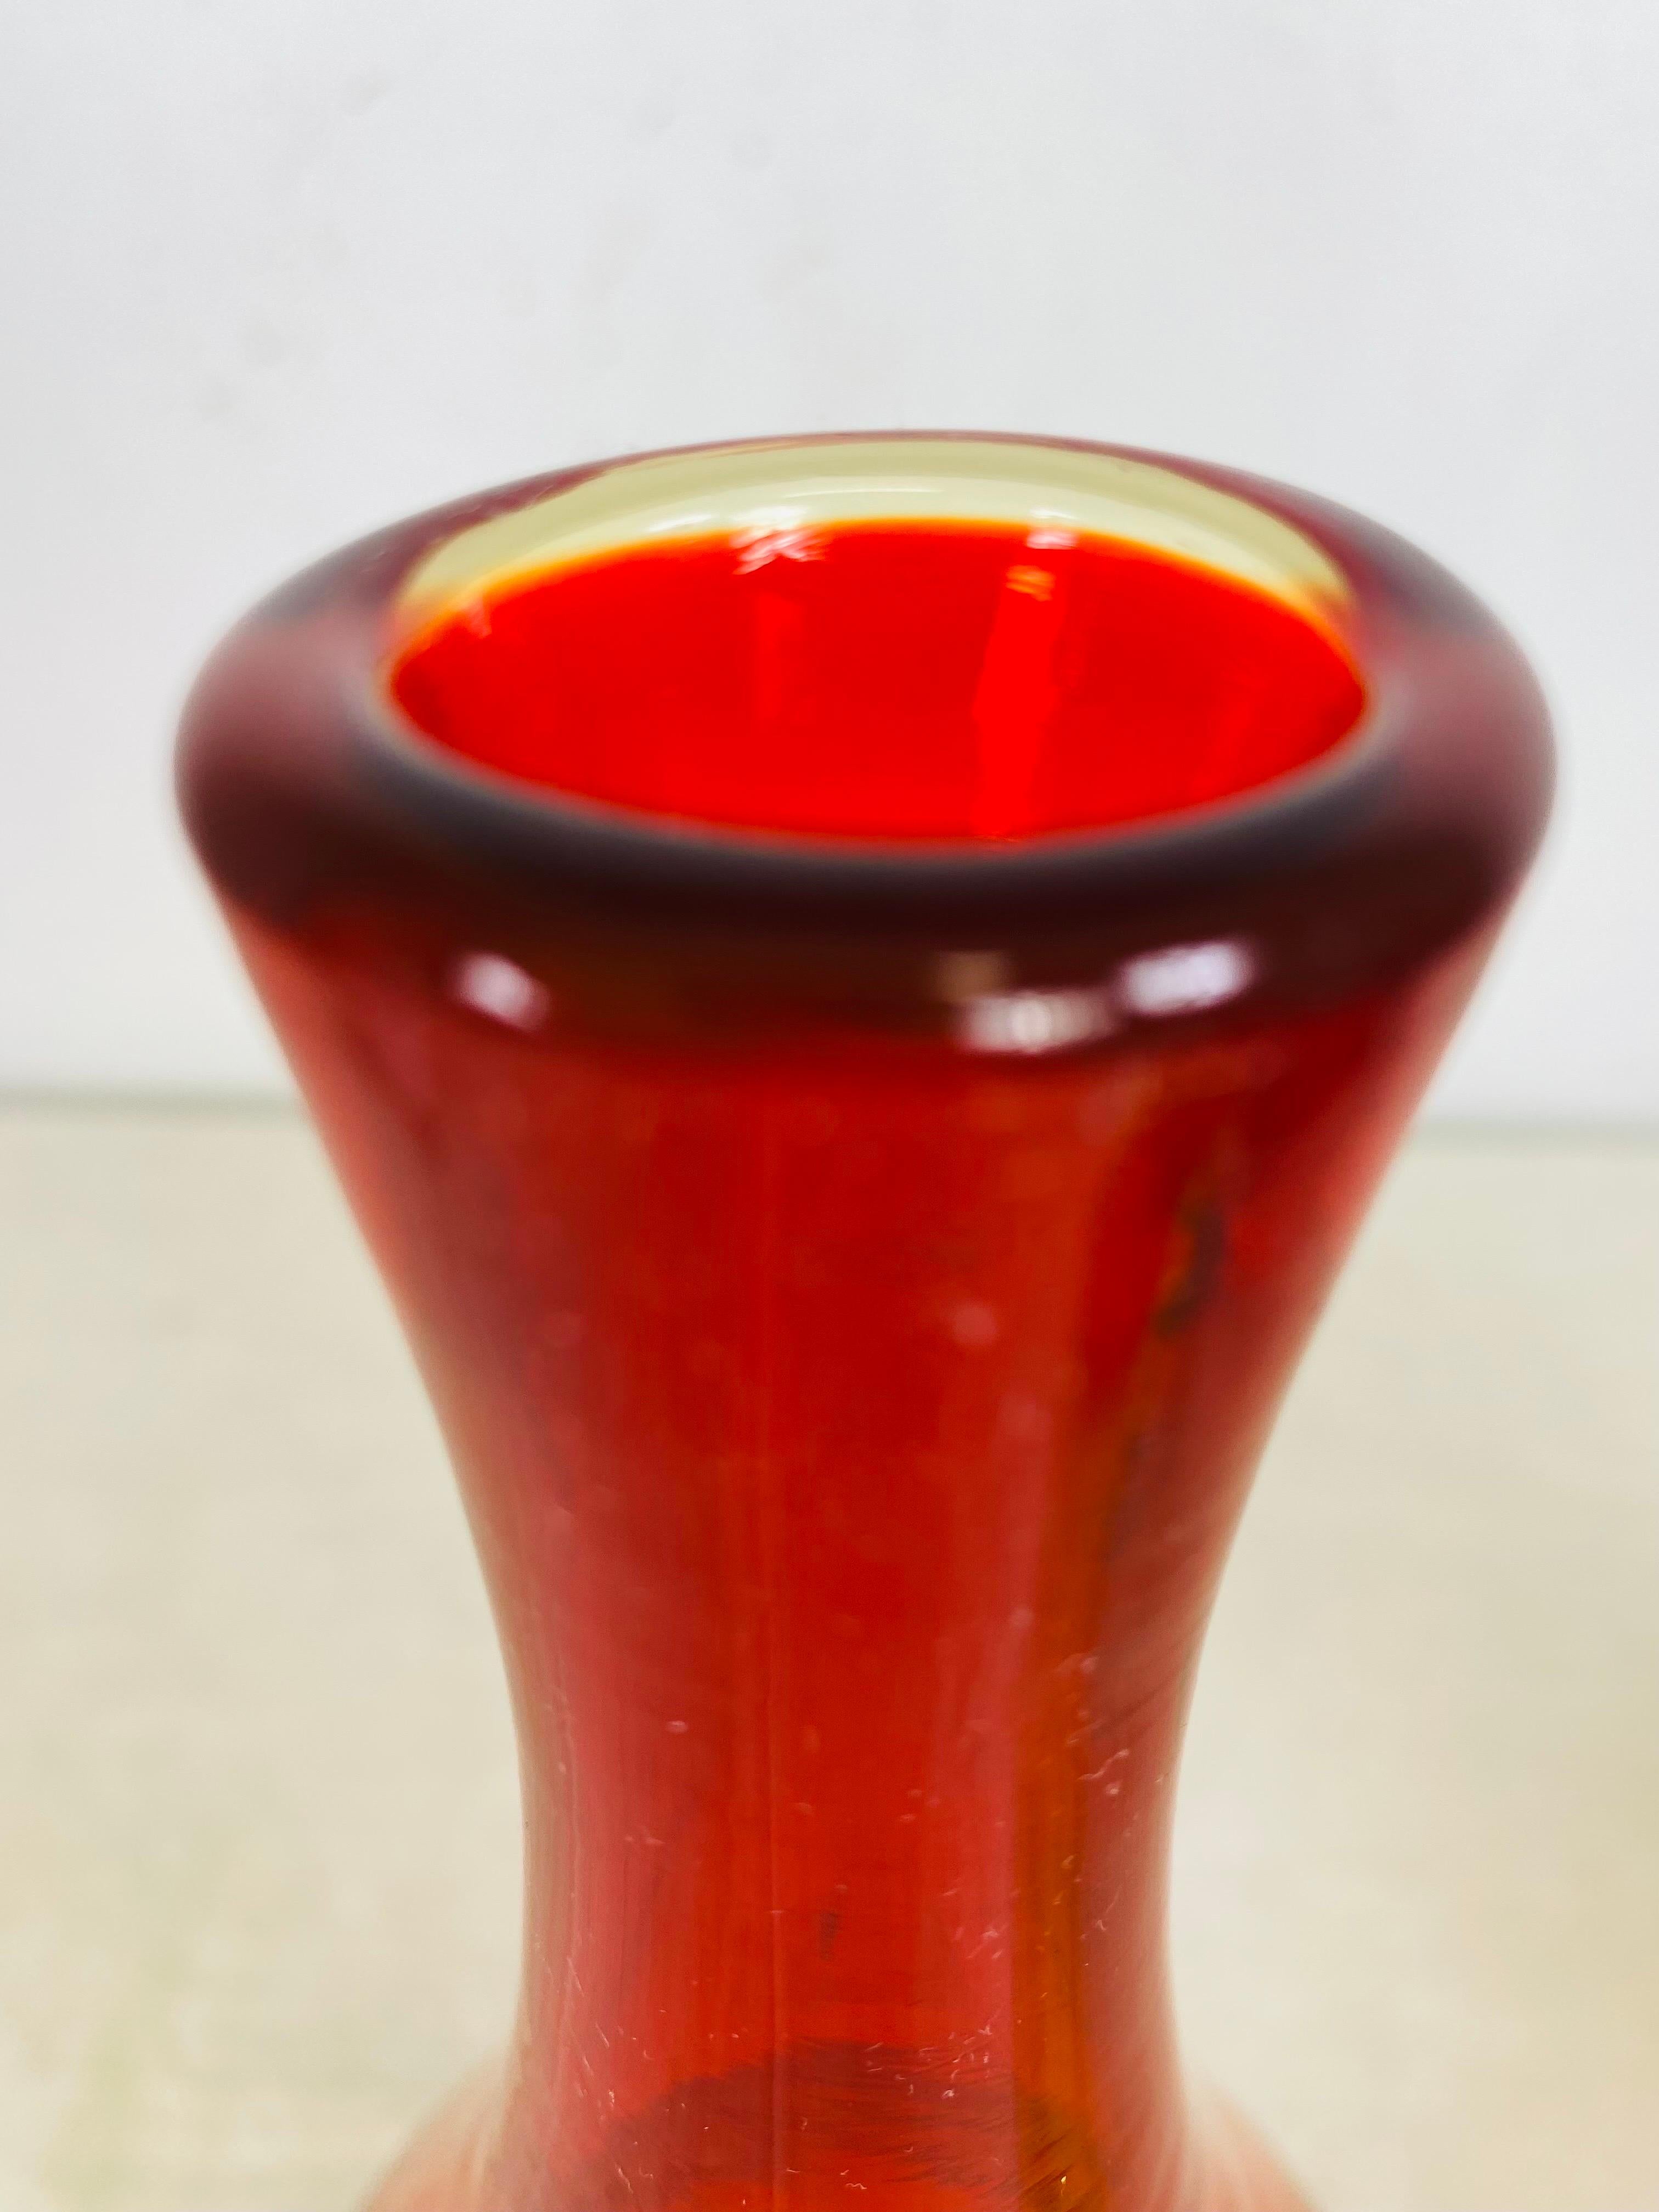 This is a midcentury, modern hand blown ambarina bud vase by Wayne Husted for Blenko. Wayne Husted was the Director of design at the Blenko Glass company in Milton, West Virginia. This slender elegant hand blown vase has an amber tone at the base